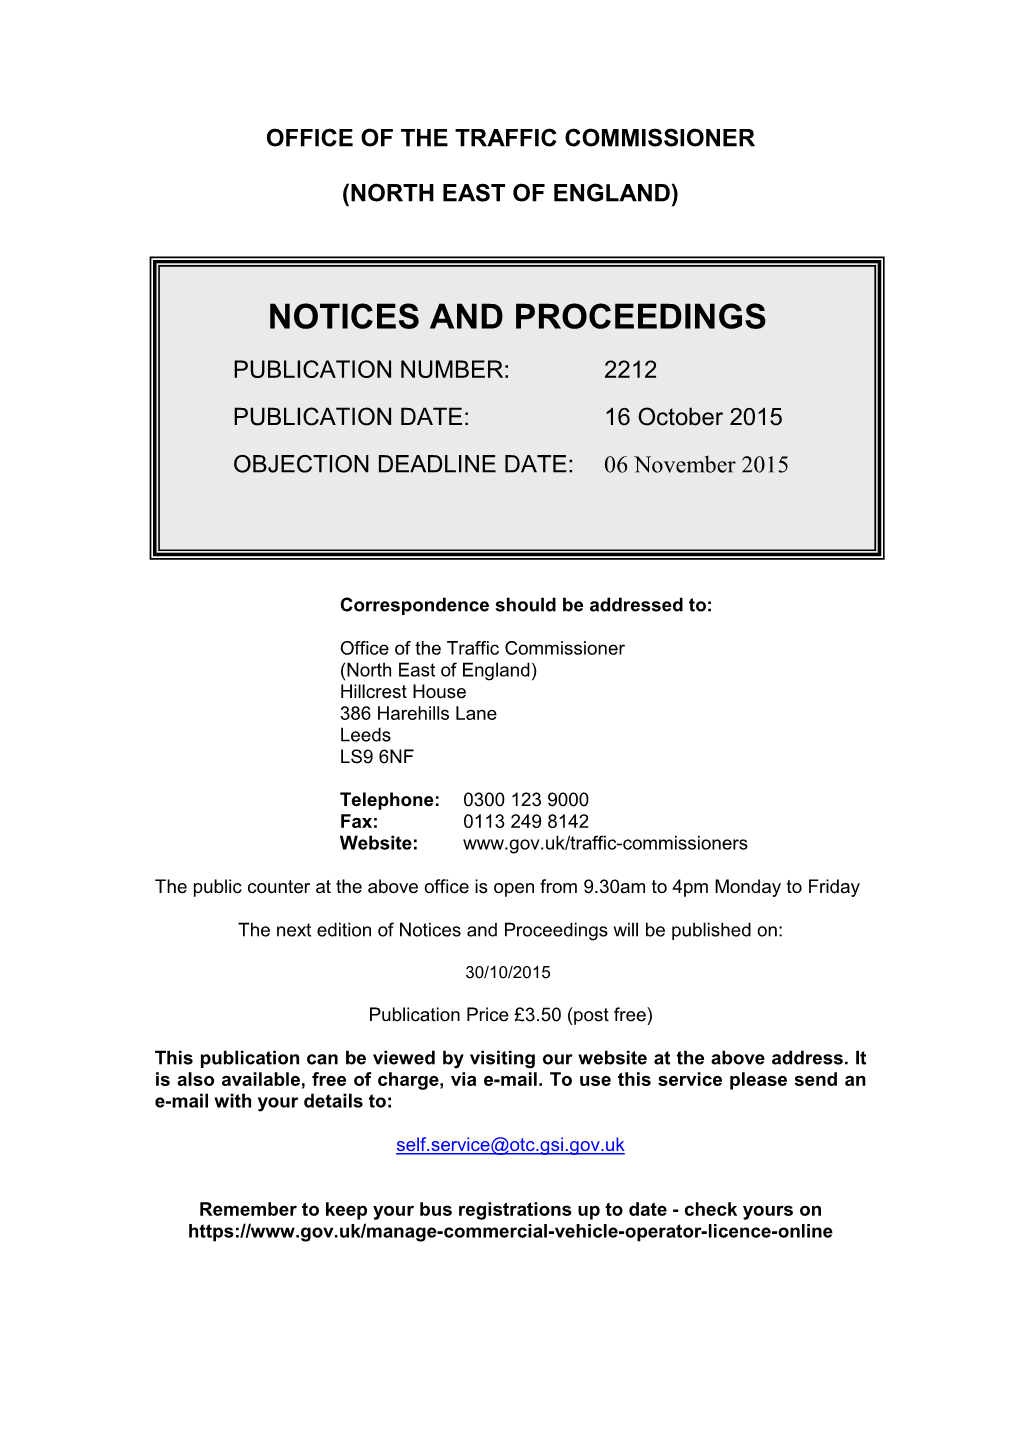 NOTICES and PROCEEDINGS 16 October 2015